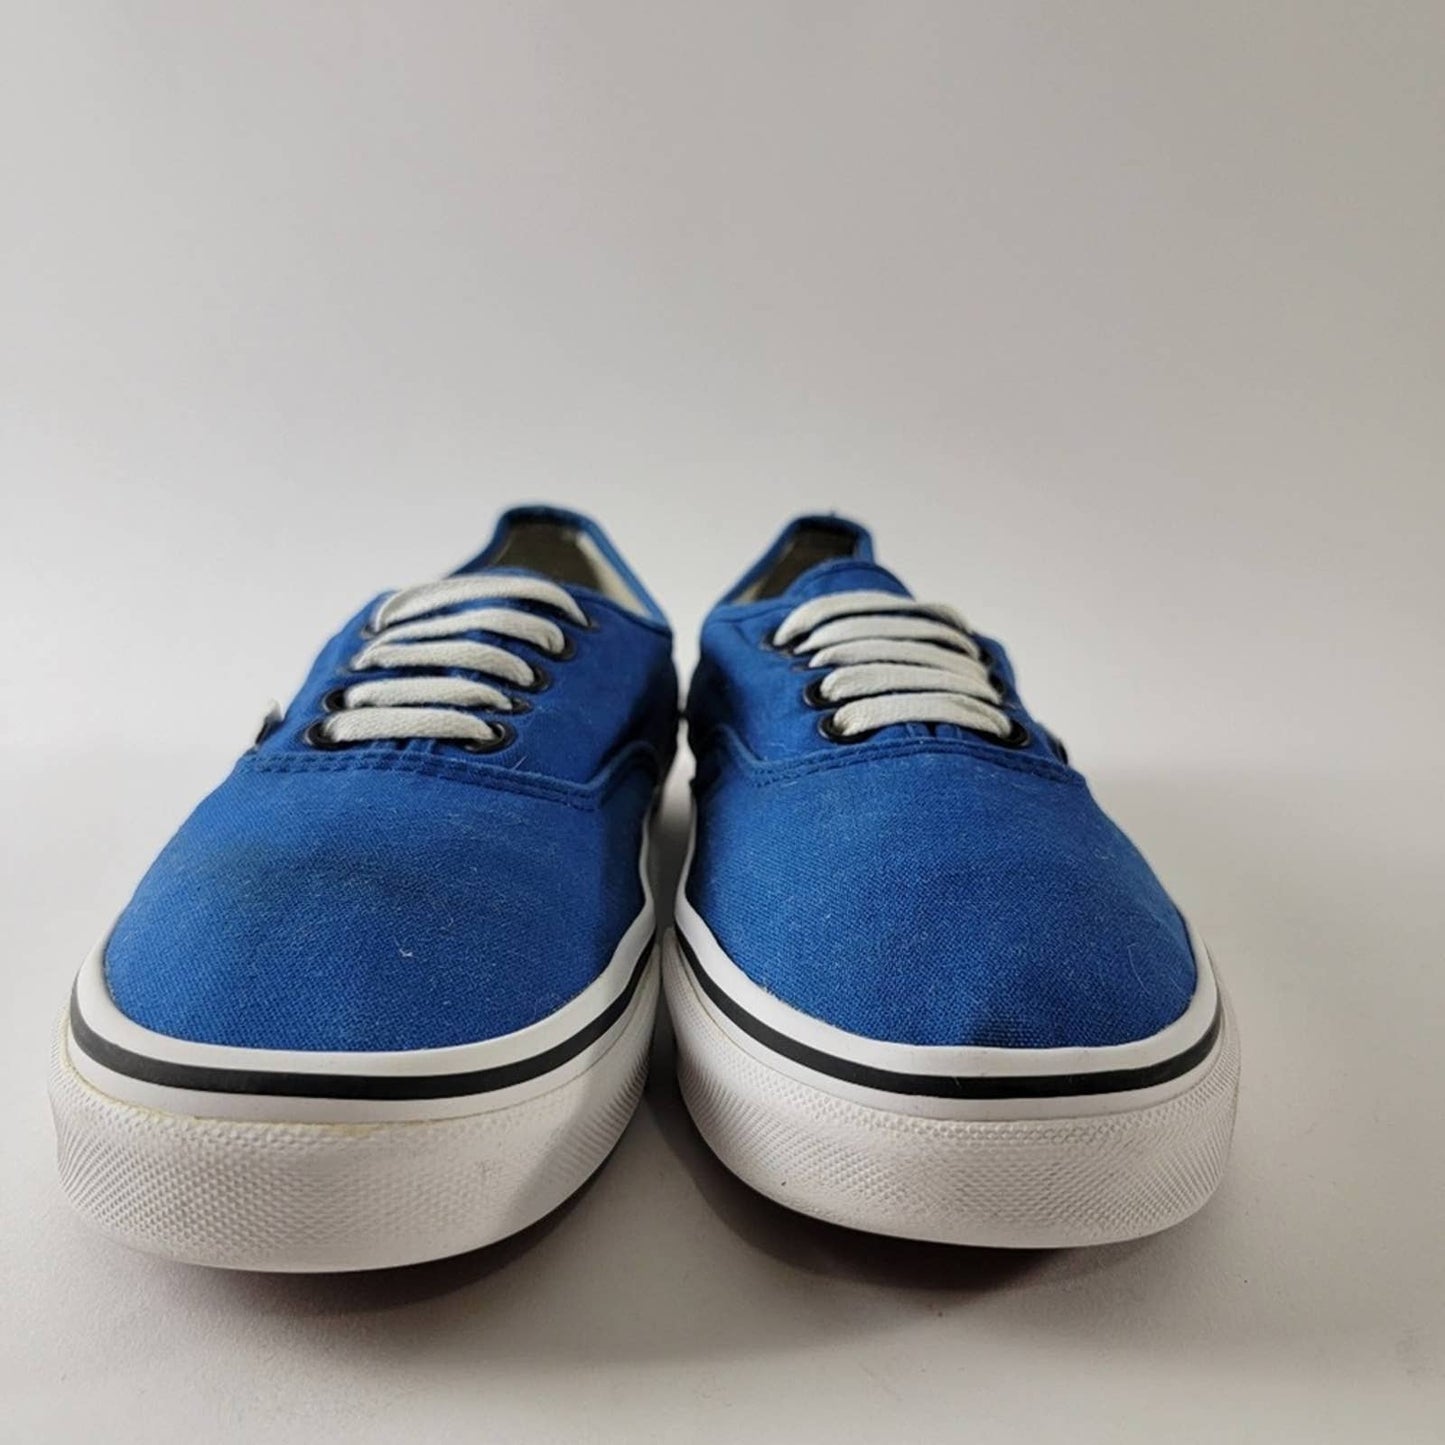 Vans Atwood Classic Lace Up Low Top Sneakers - 9.5 / 11